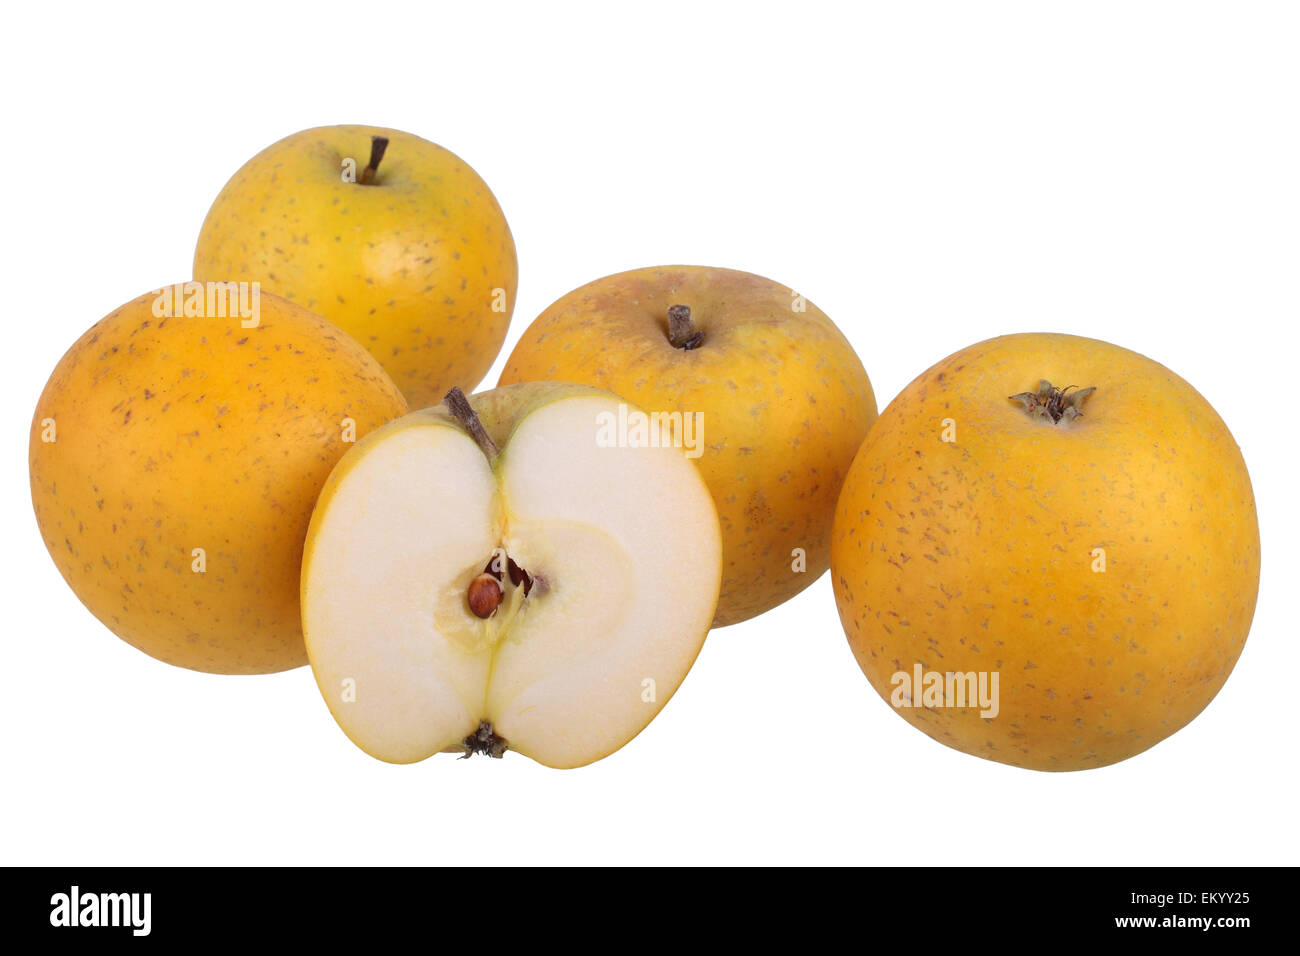 Apple variety Ananas Reinette, with one cut apple Stock Photo